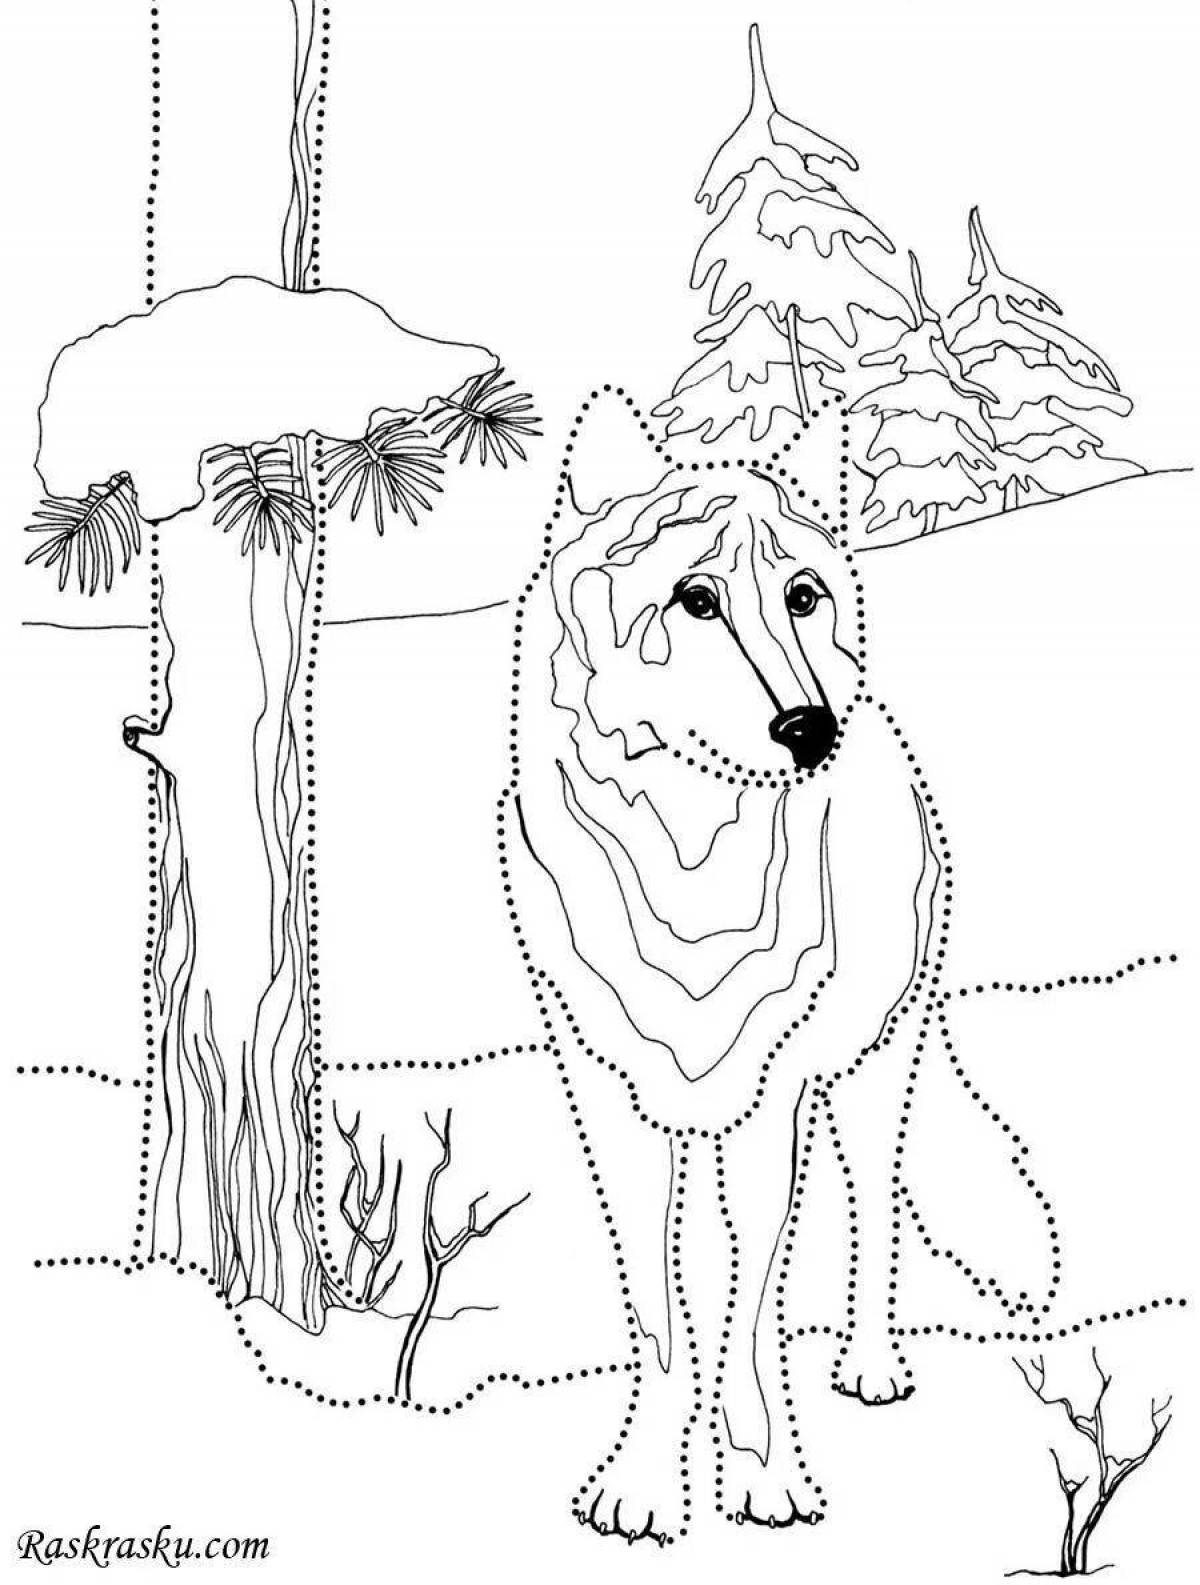 Shiny coloring pages animals in the forest in winter